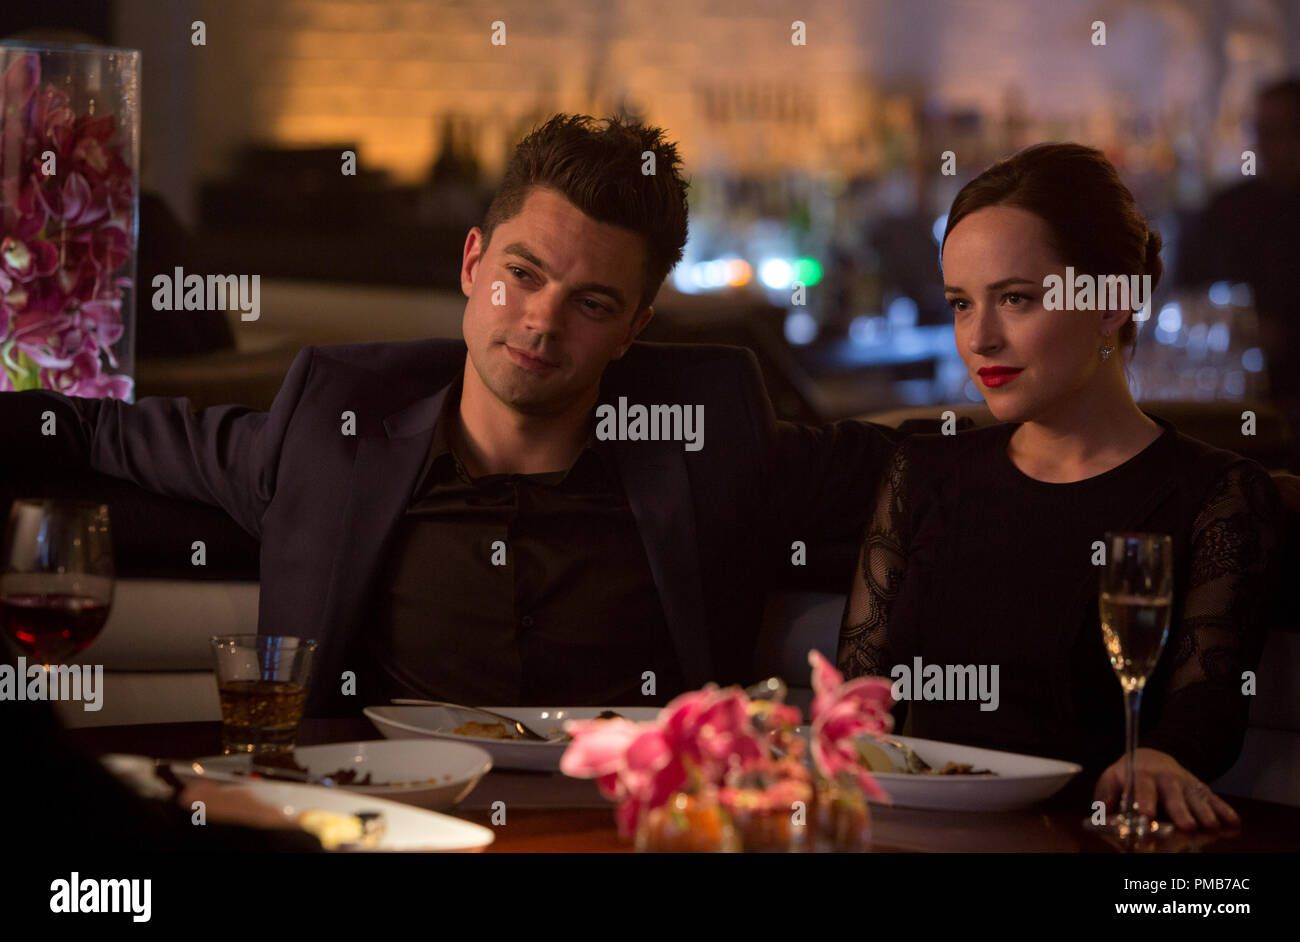 Dominic Cooper as Dino Brewster and Dakota Johnson as Anita co-star in  DreamWorks Pictures' "Need